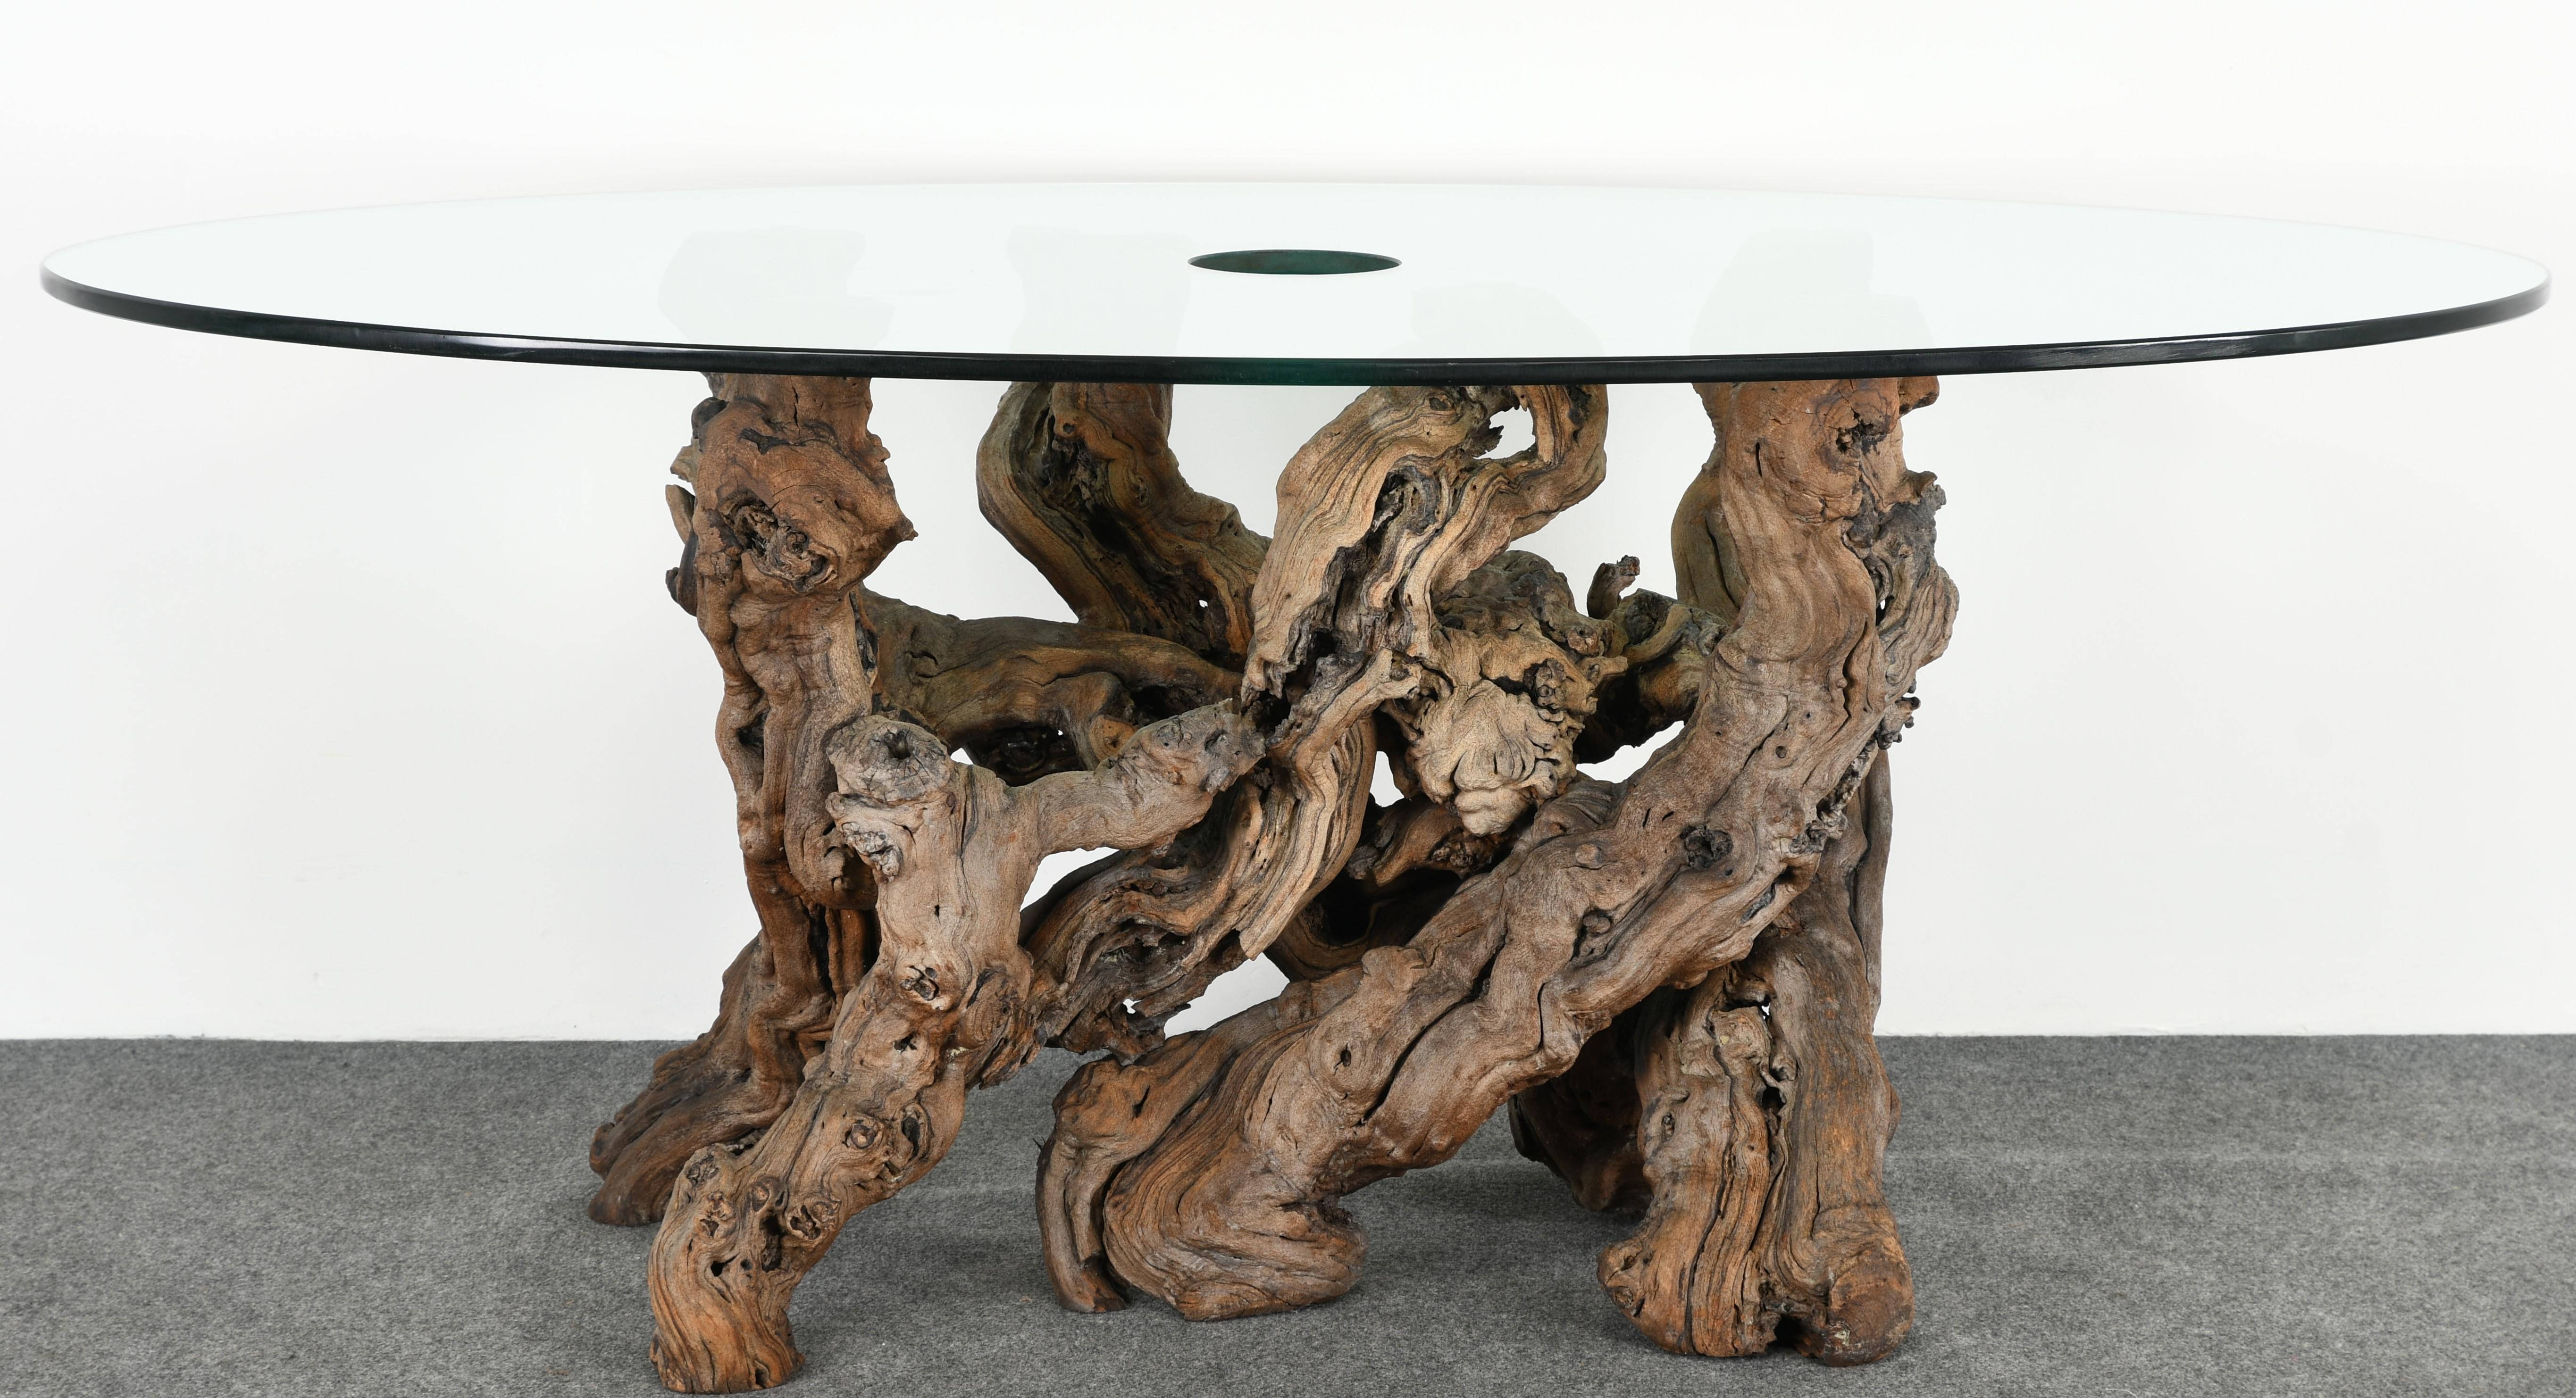 An organic grapevine dining table with a unique glass top wine bottle holder. This is a great table for entertaining and dining with guests. The table is a conversation piece with its old vintage grapevine base. This table comes with the original